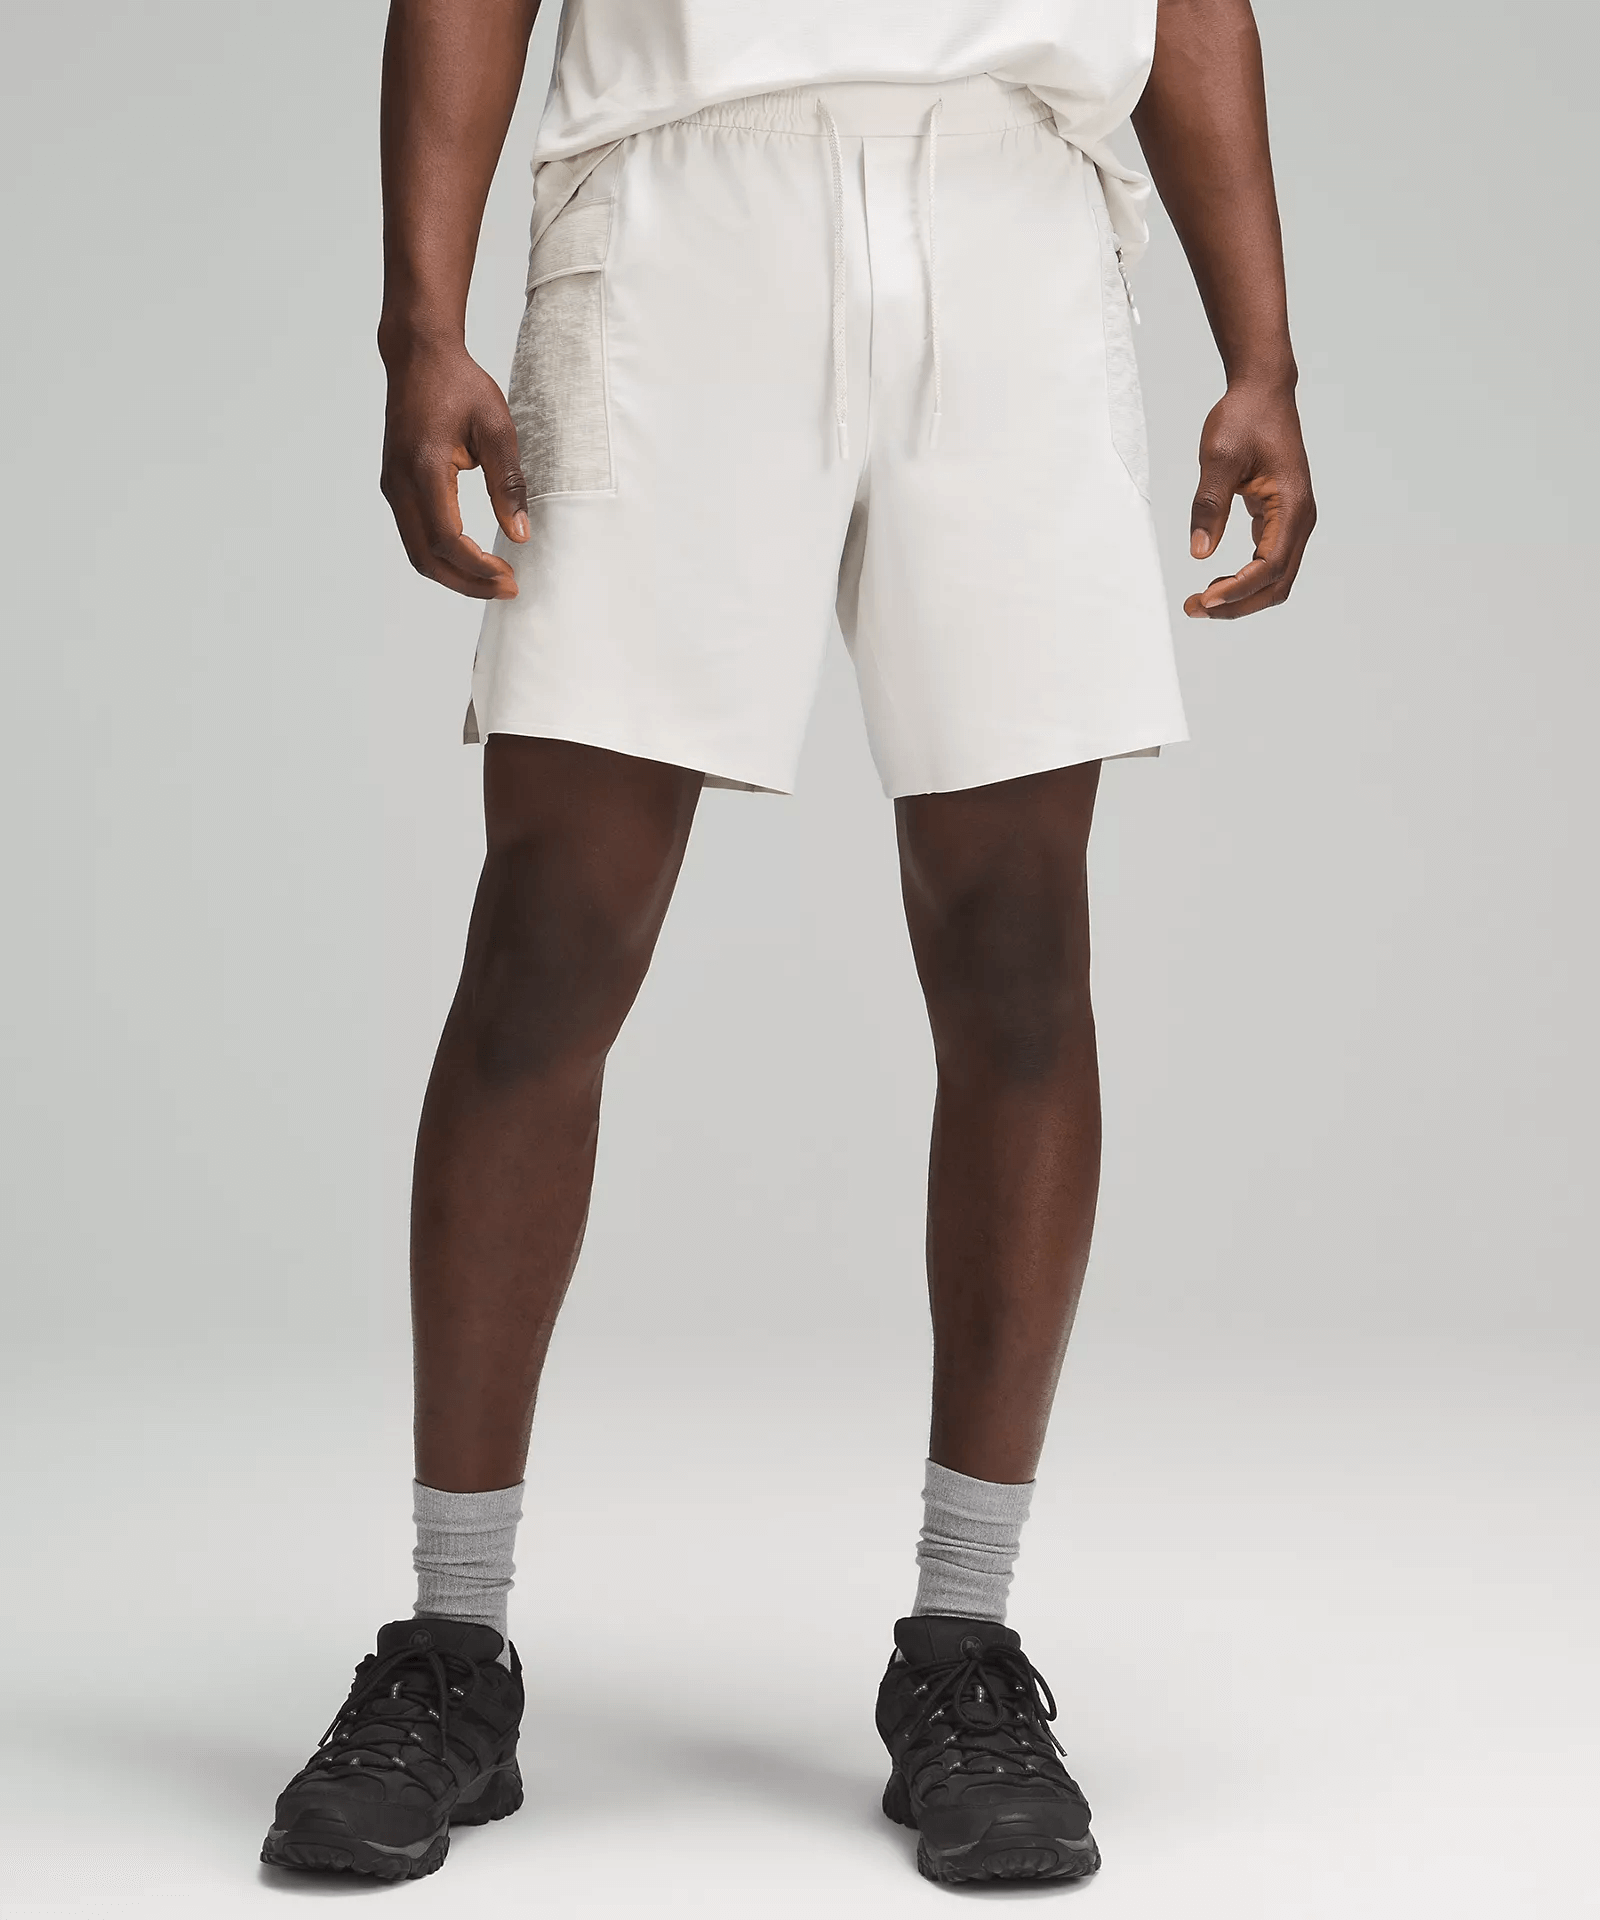 lululemon 'We Made Too Much' restock: Hotty shorts, sneakers and